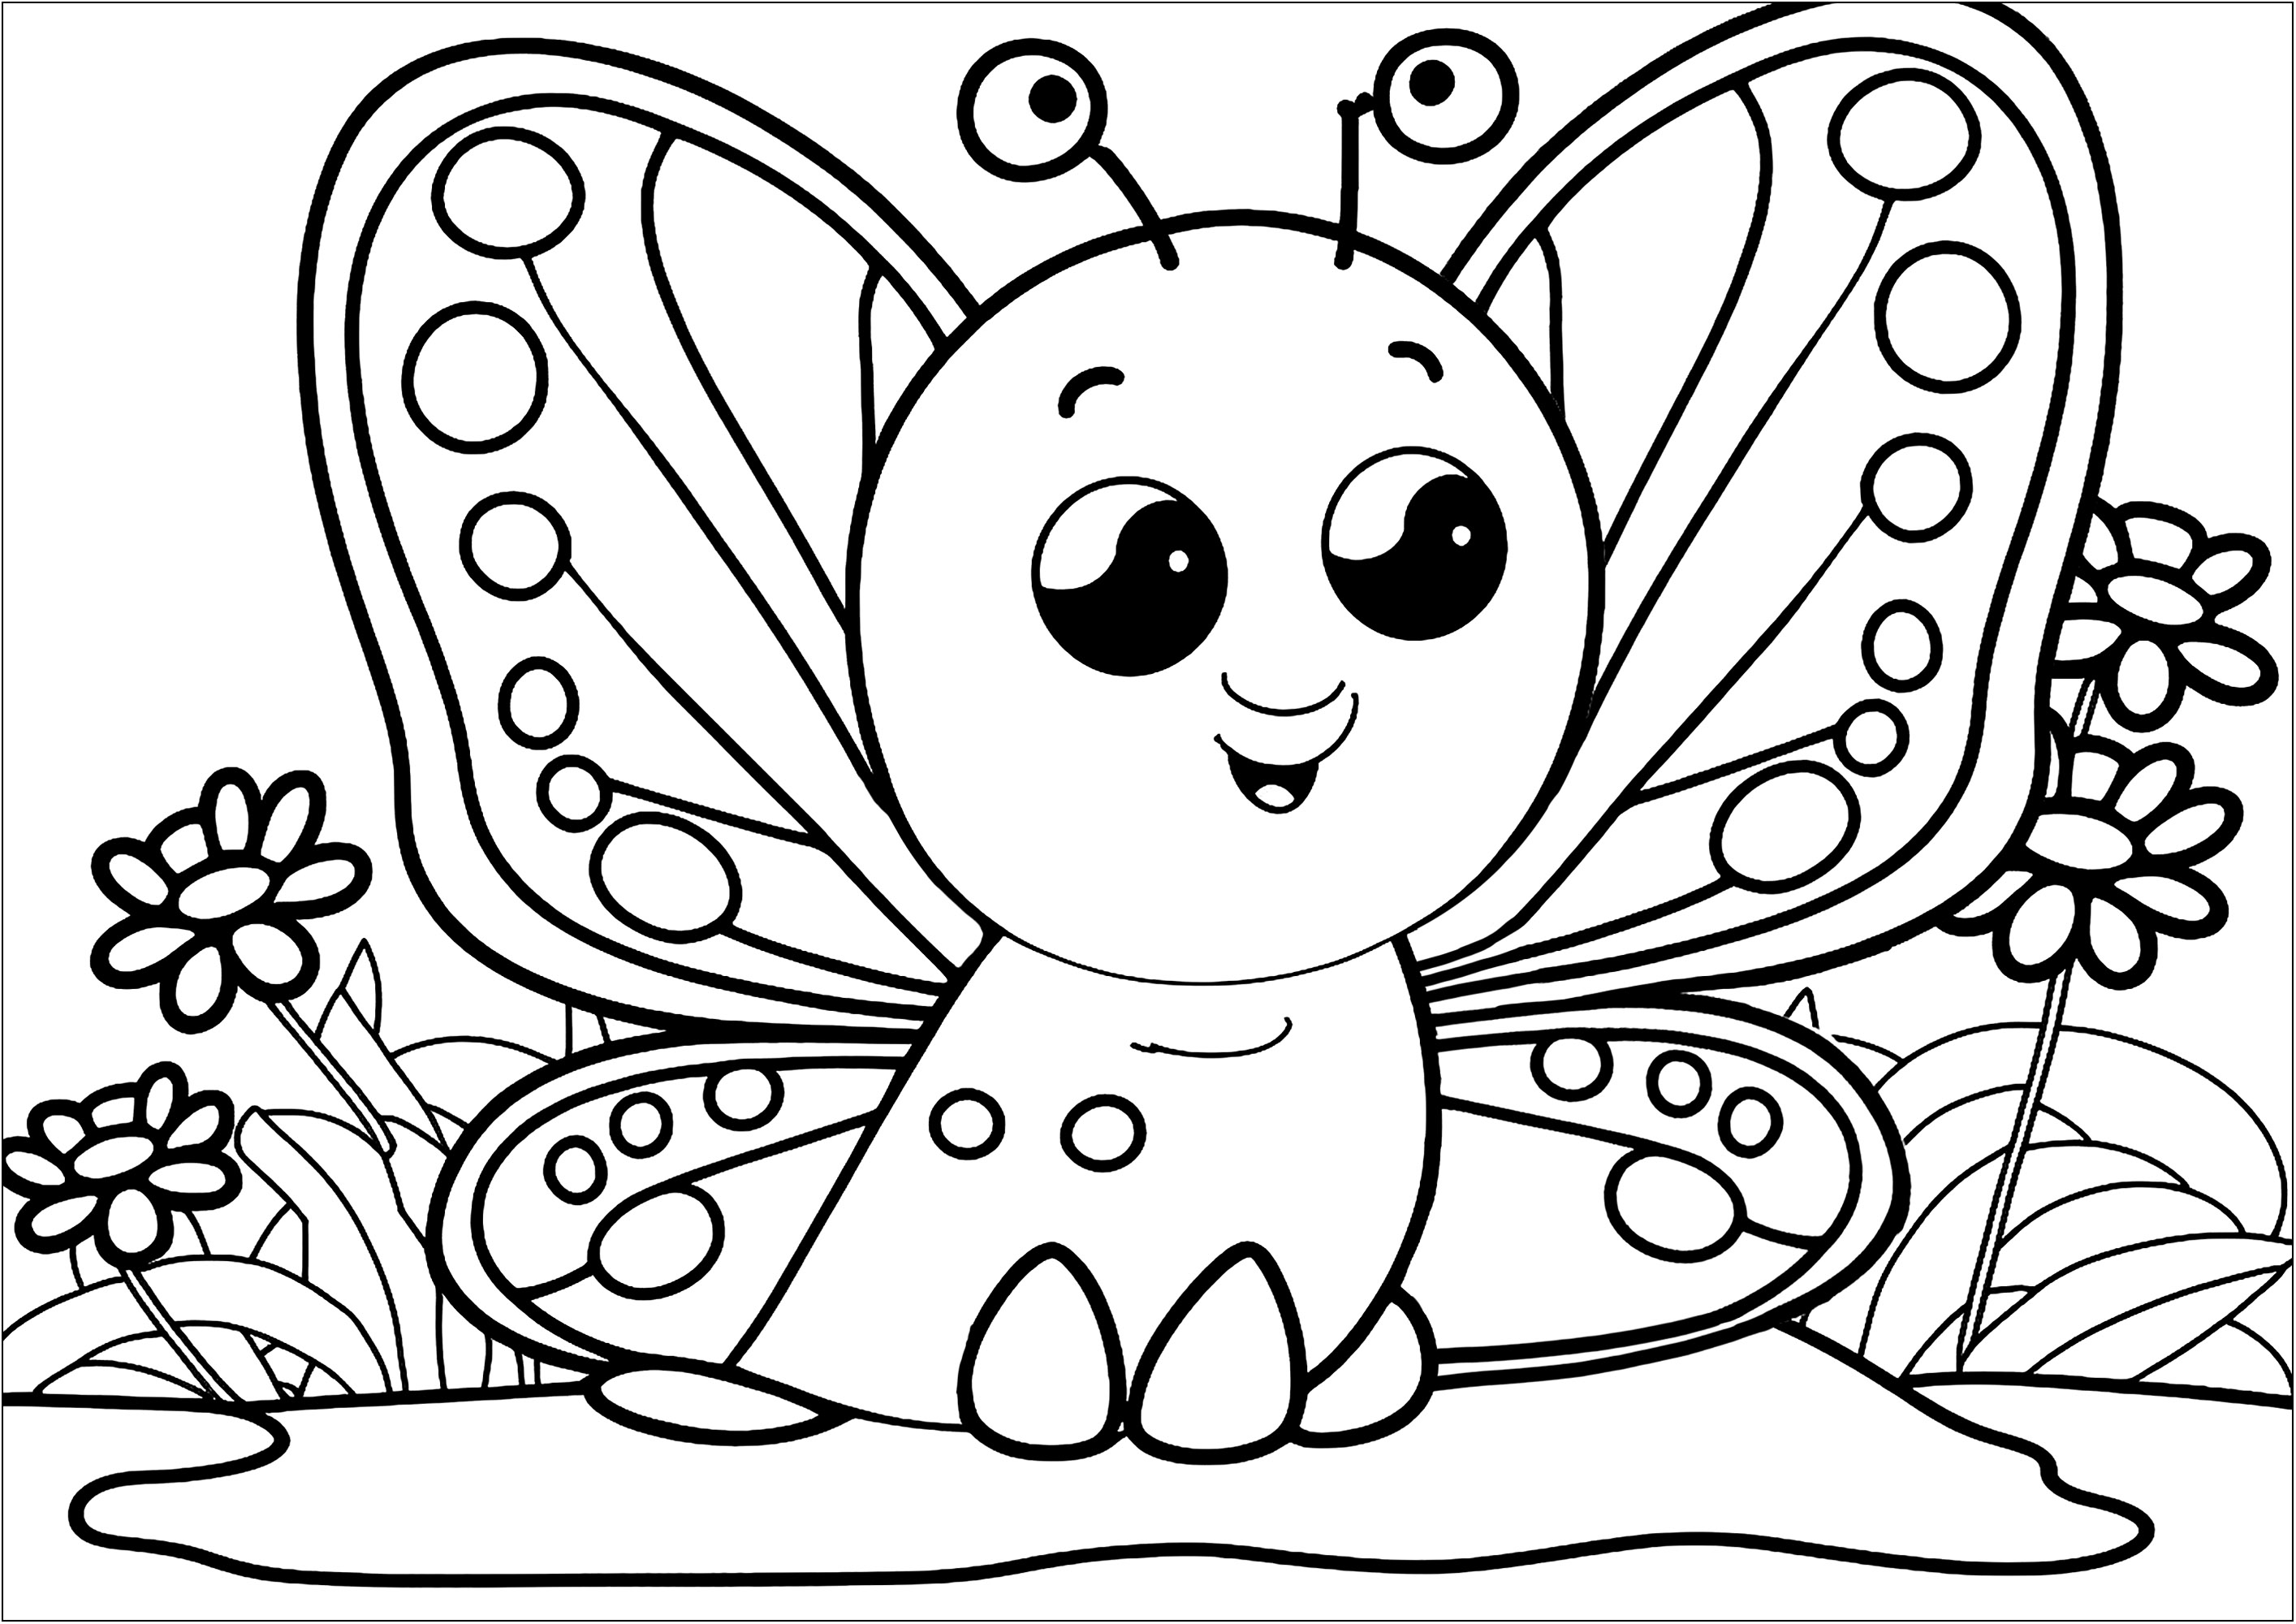 A nice little butterfly with big eyes, very simple to color. This coloring page has fairly few details and large areas, so it's perfect for the little ones.With bright colors, this little butterfly will look even more charming. Kids will be thrilled to see the results of their work once the coloring is done!